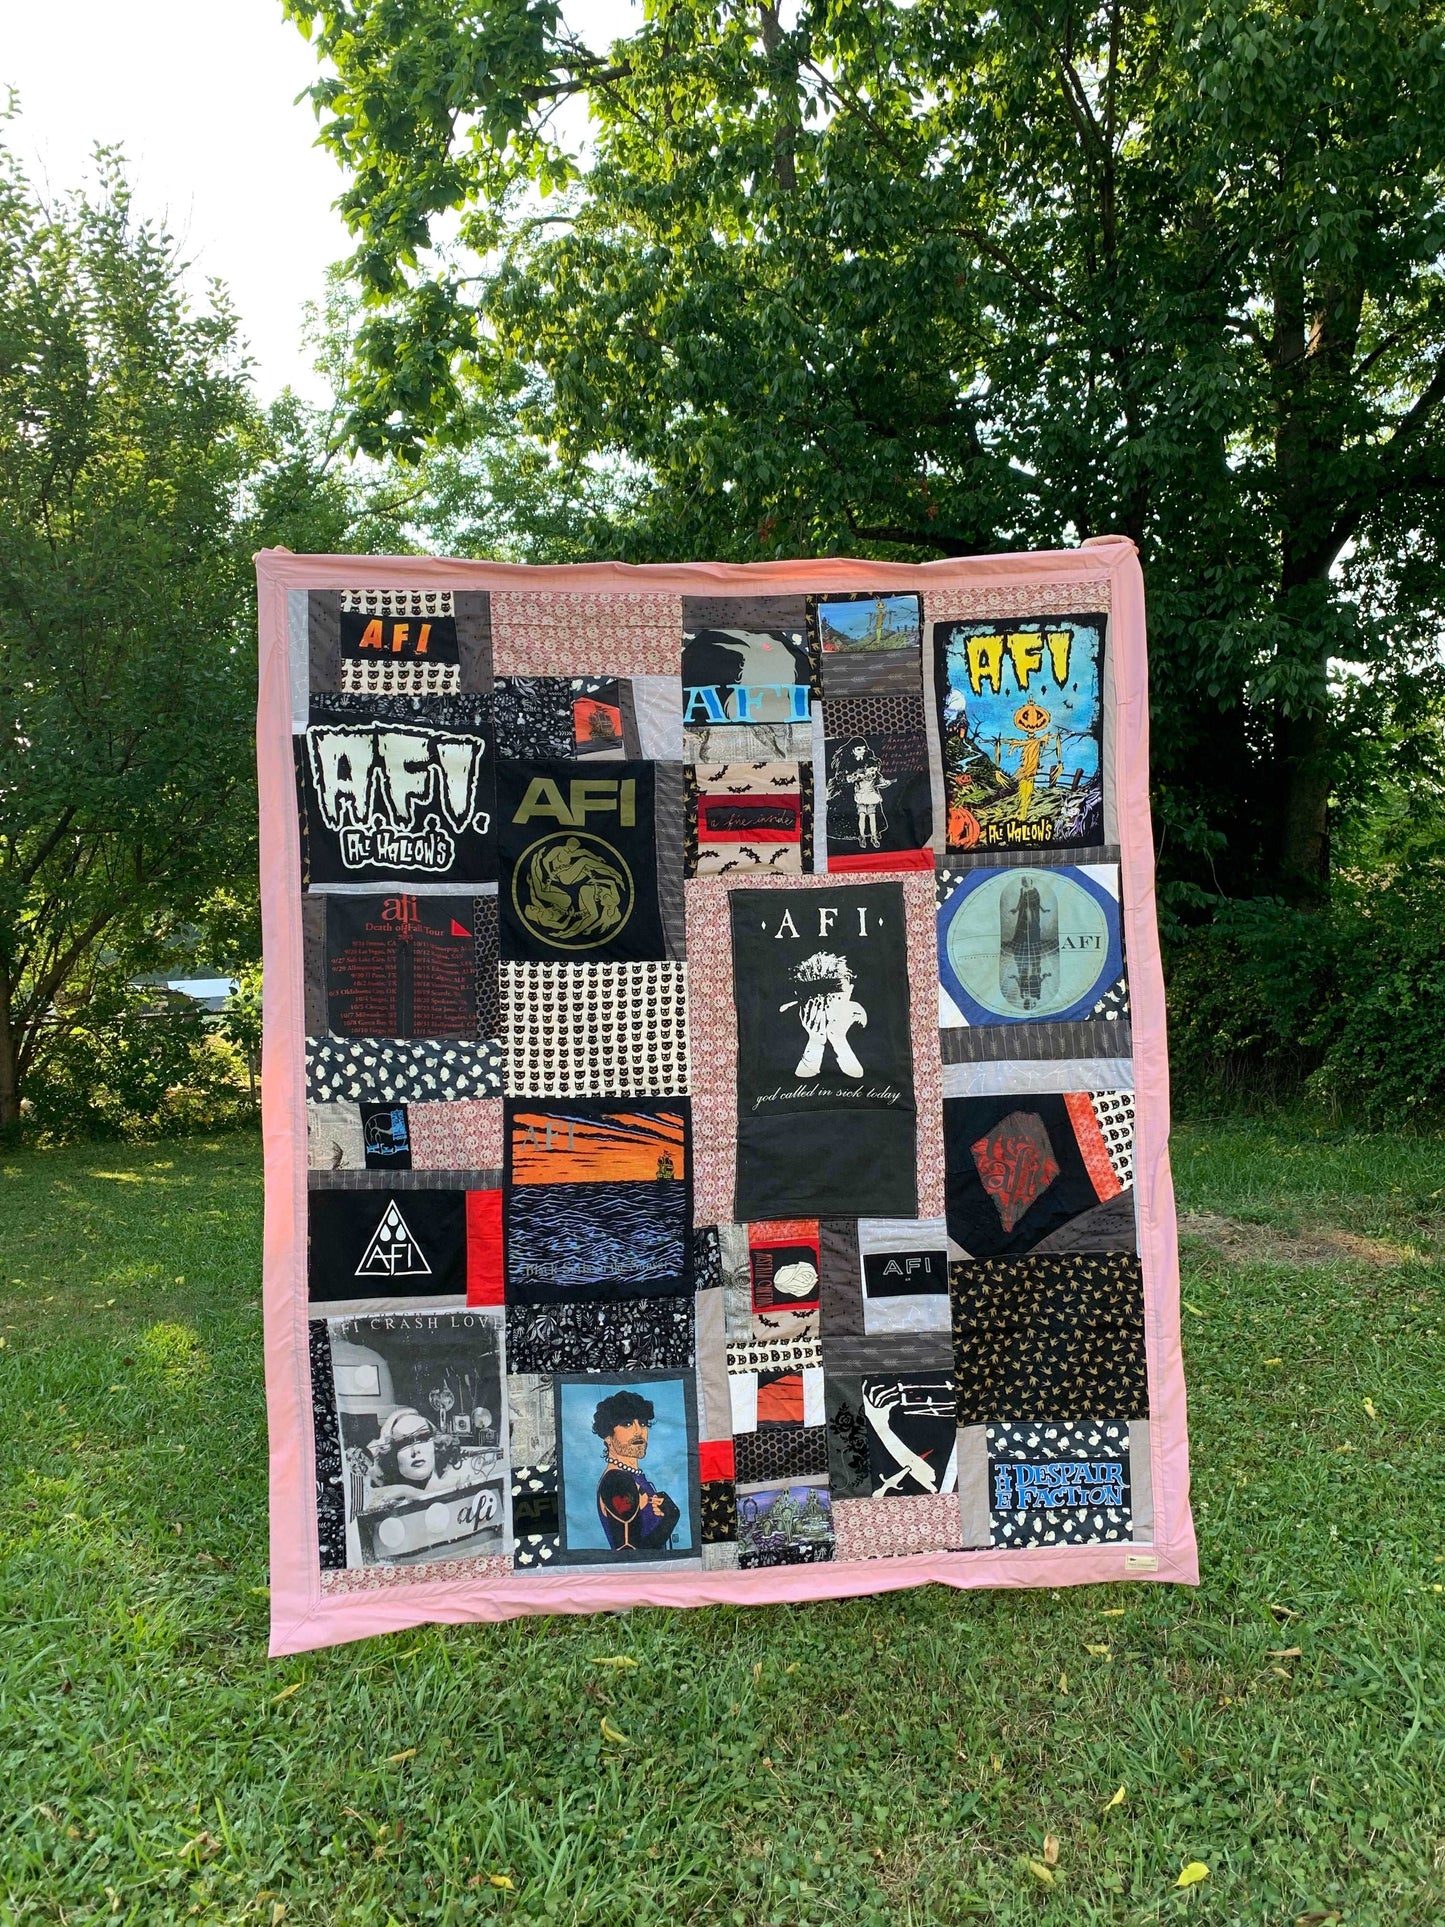 A tshirt quilt, featuring the band AFI (A Fire Inside) is held up outside with a green background and lawn.